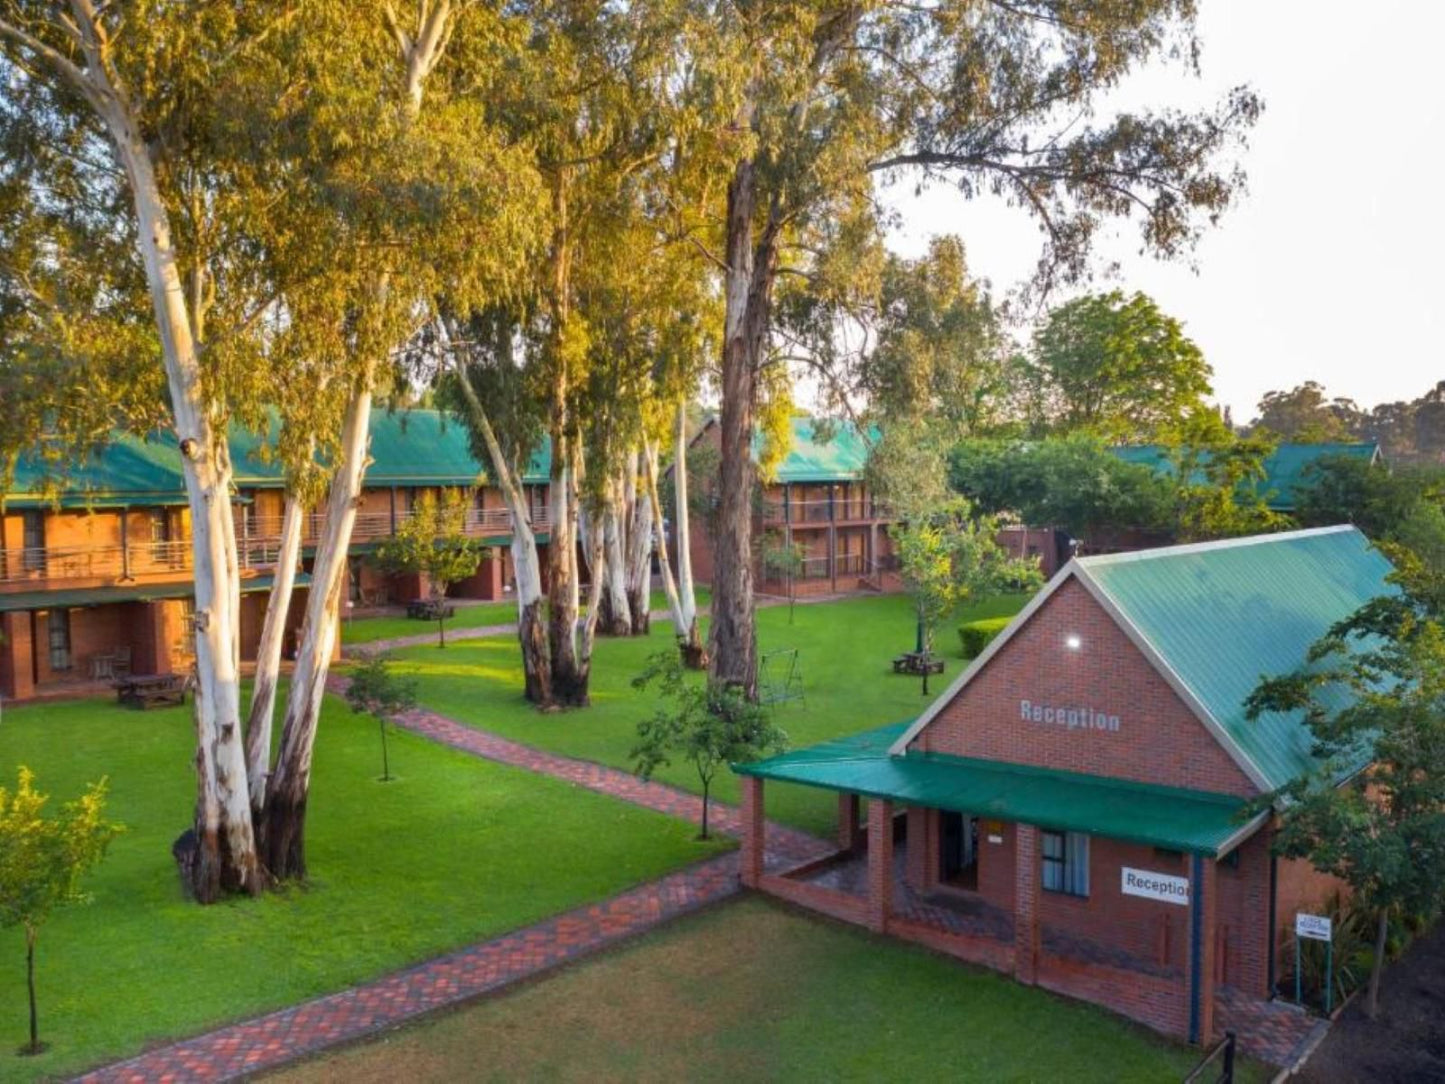 Bethal Bluegum Country Lodge Bethal Mpumalanga South Africa House, Building, Architecture